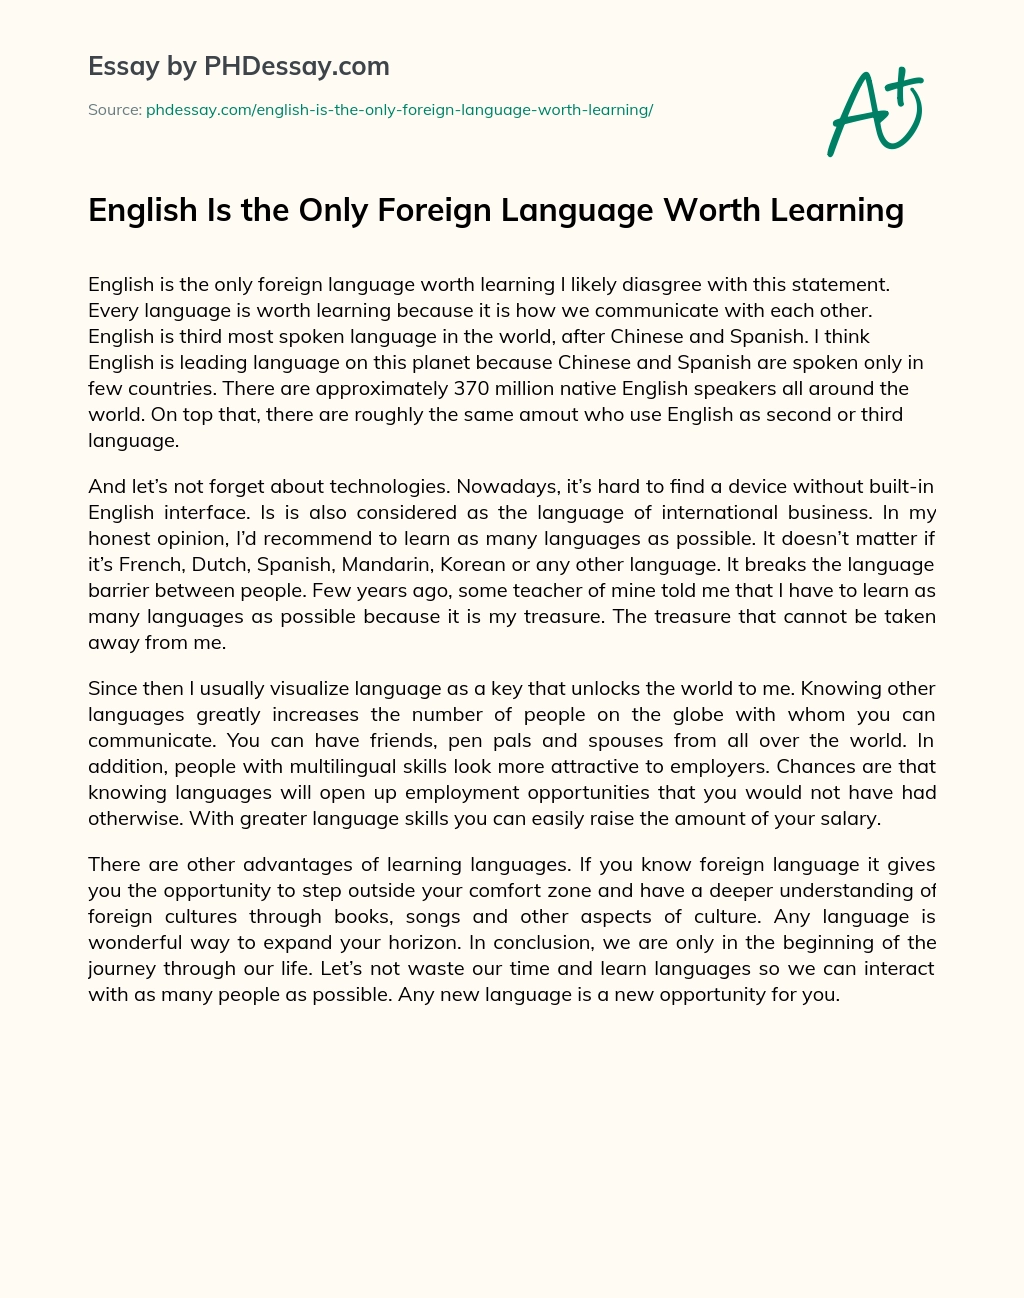 English Is the Only Foreign Language Worth Learning essay